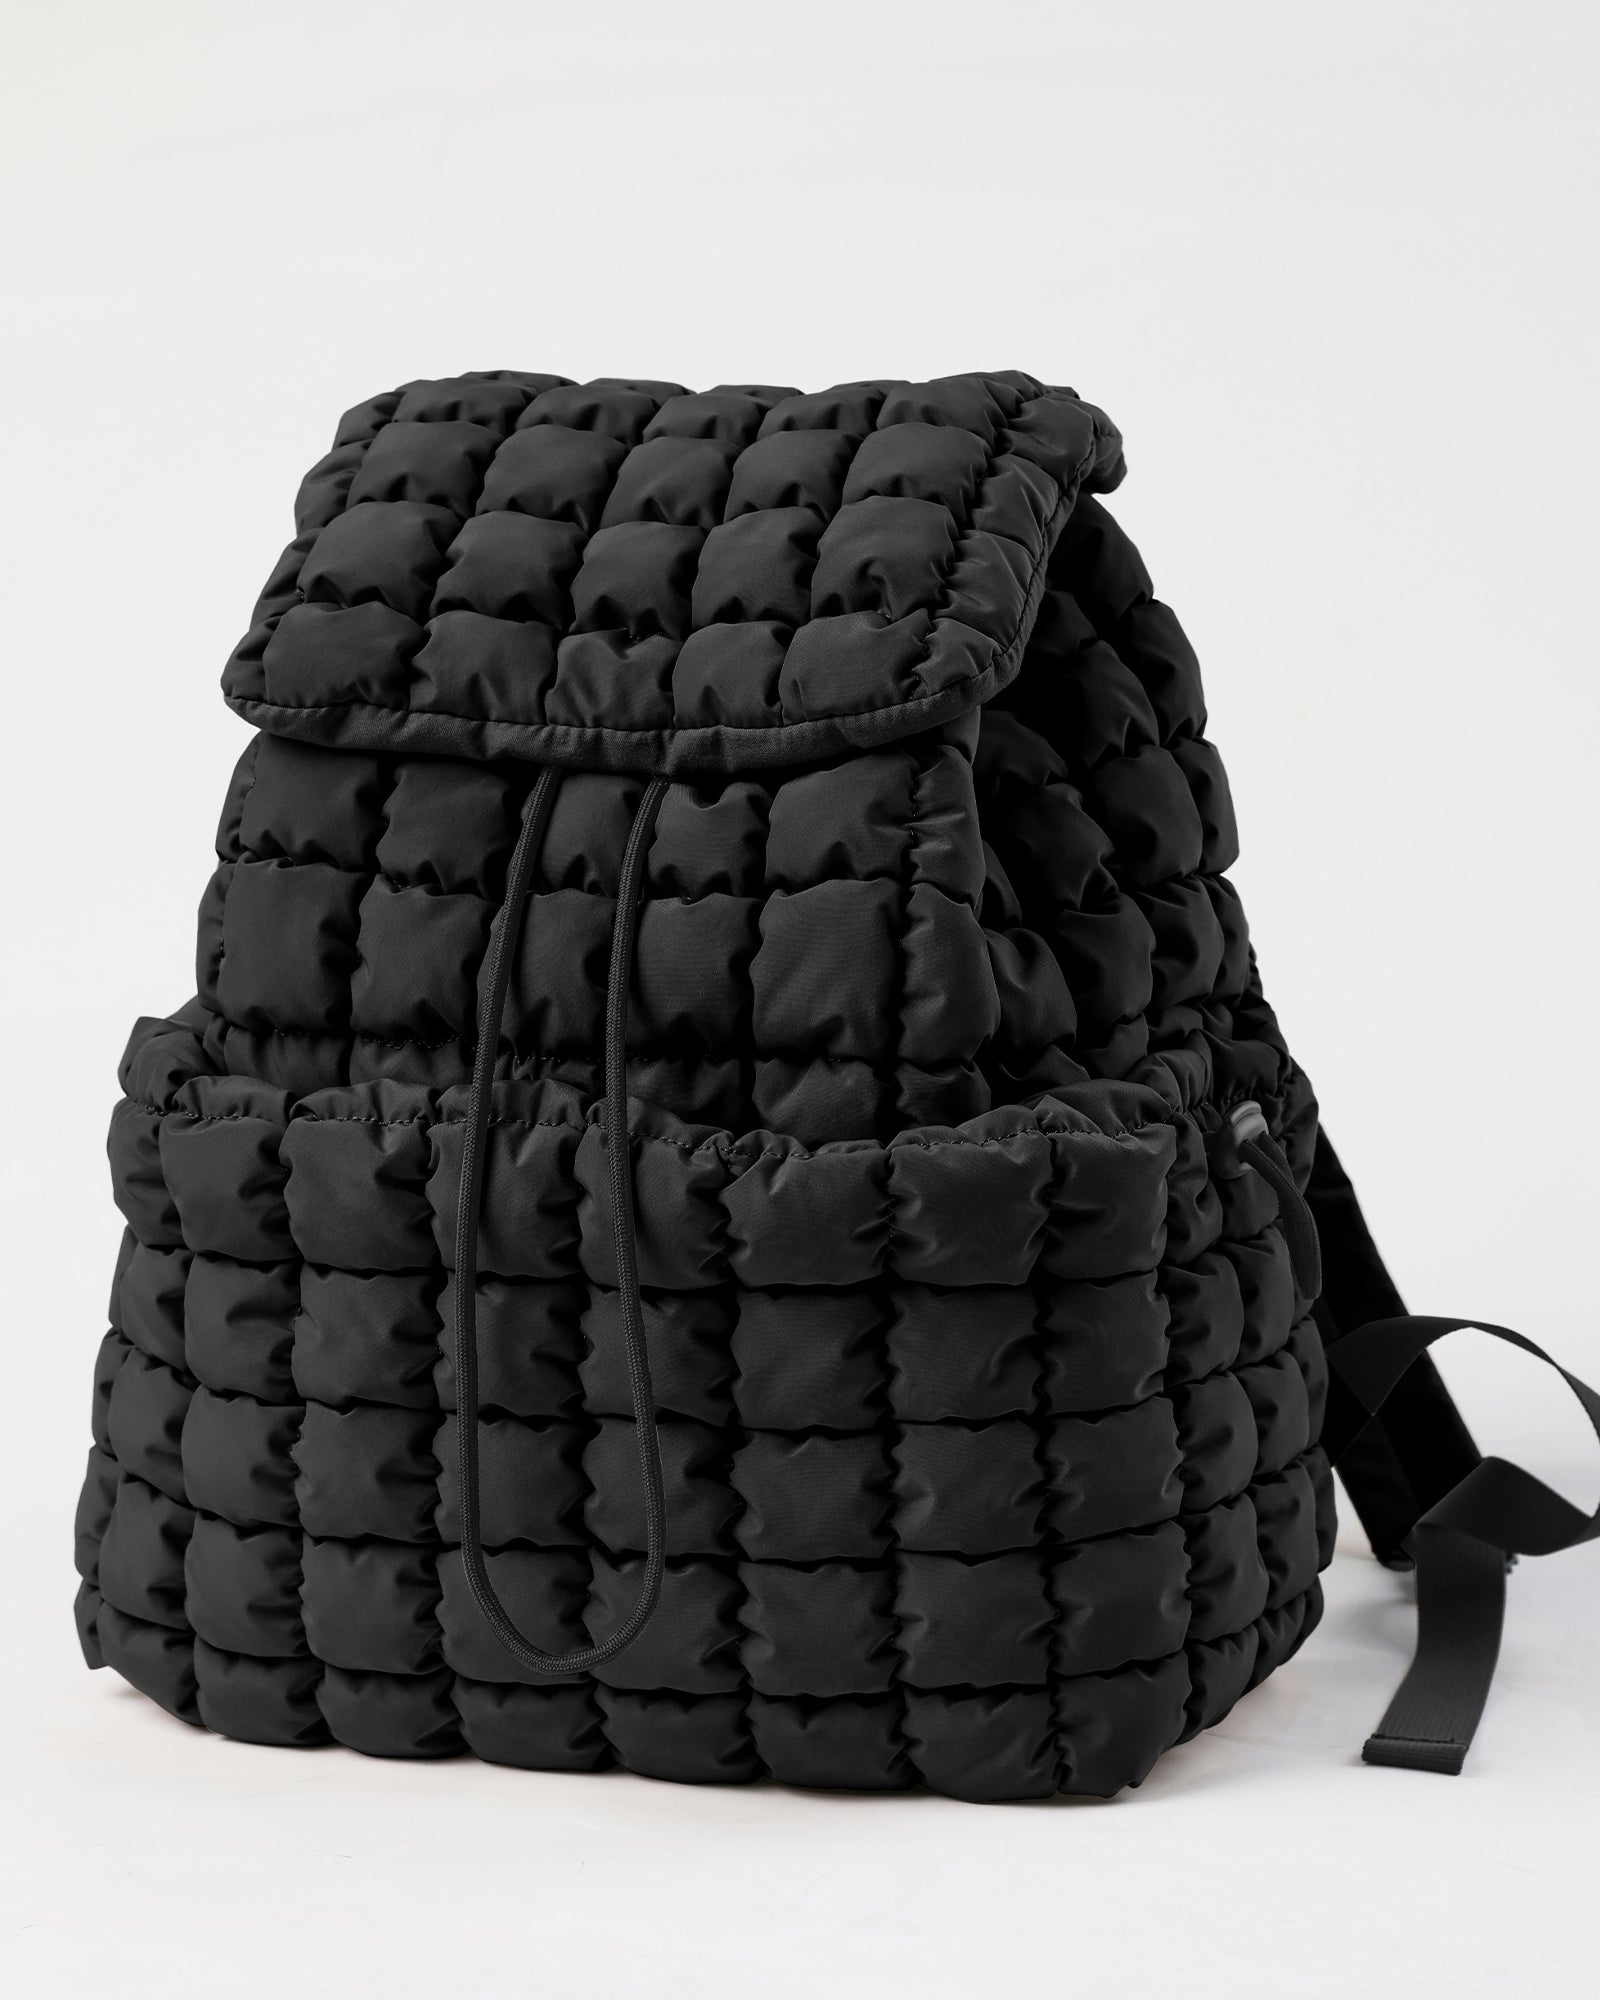 Lightweight Quilted Backpack Black 13" x 15" x 6.5" - ododos